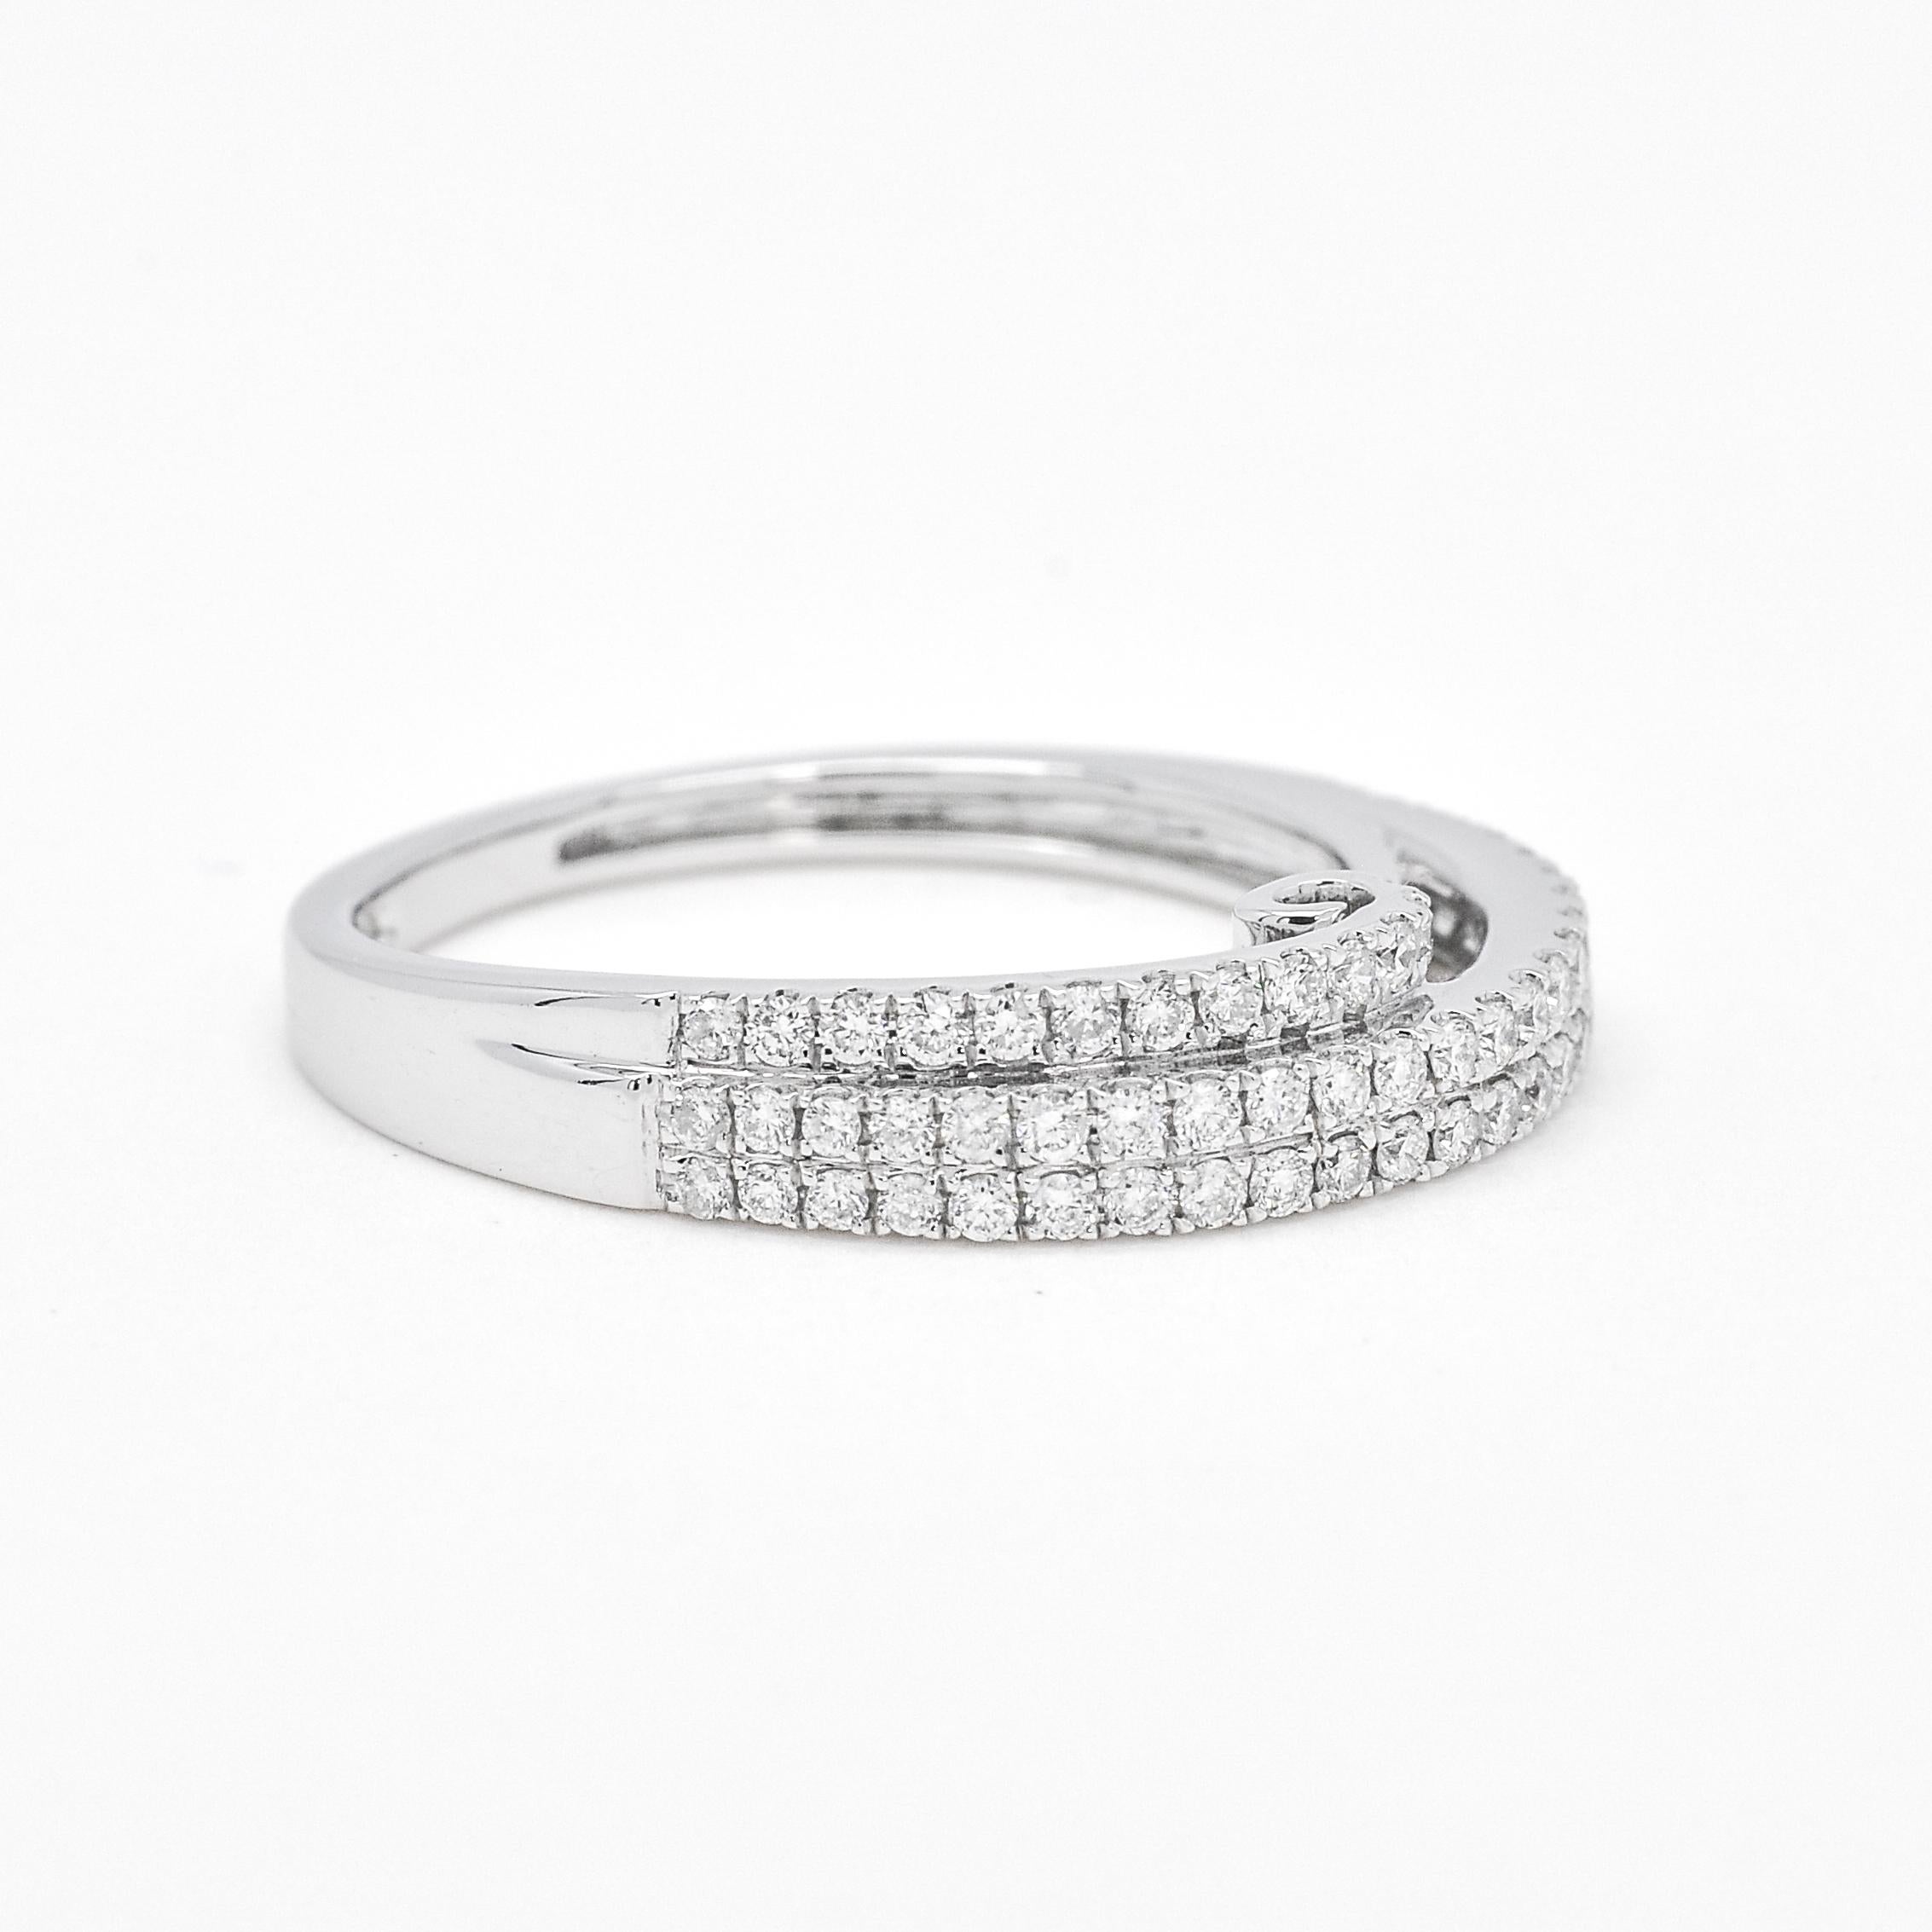 For Sale:  Natural Diamond Band, 18kt White Gold Double Row Half Eternity Band Ring 4